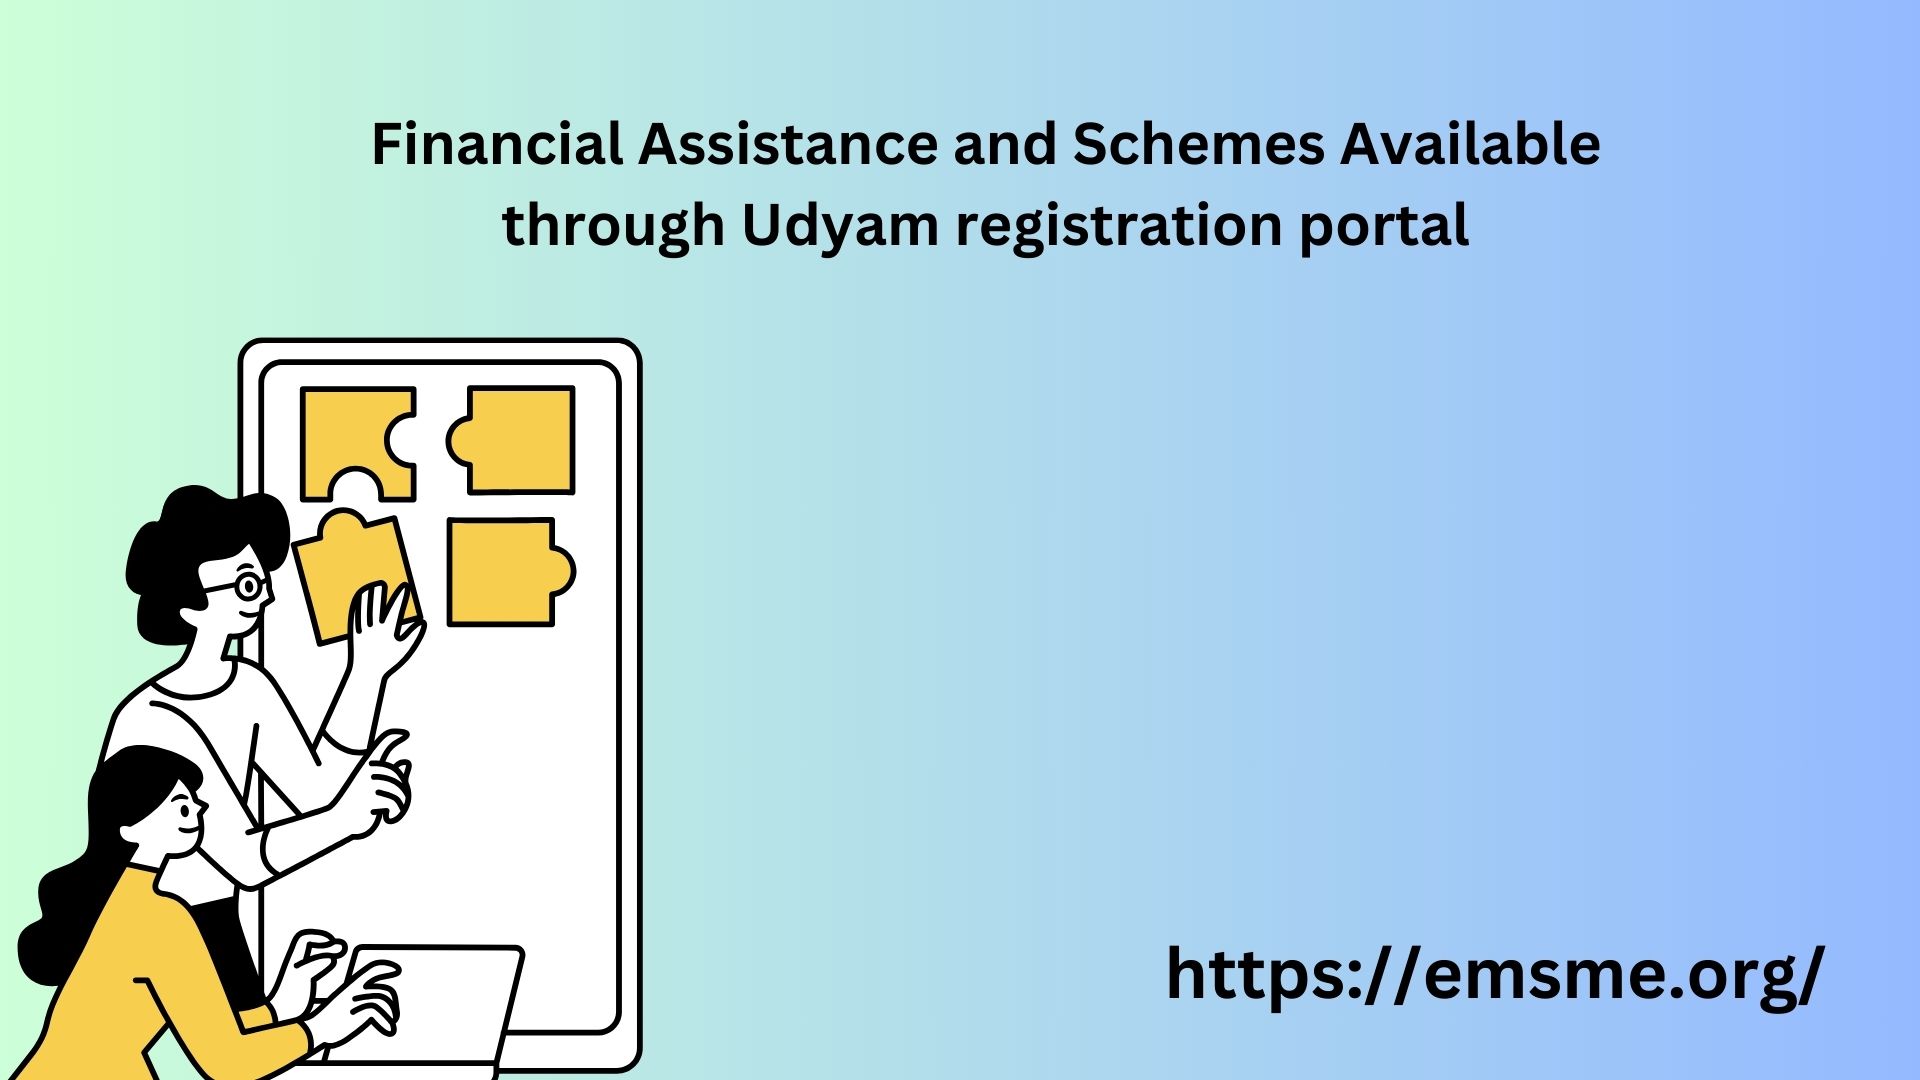 Financial Assistance and Schemes Available through Udyam registration portal